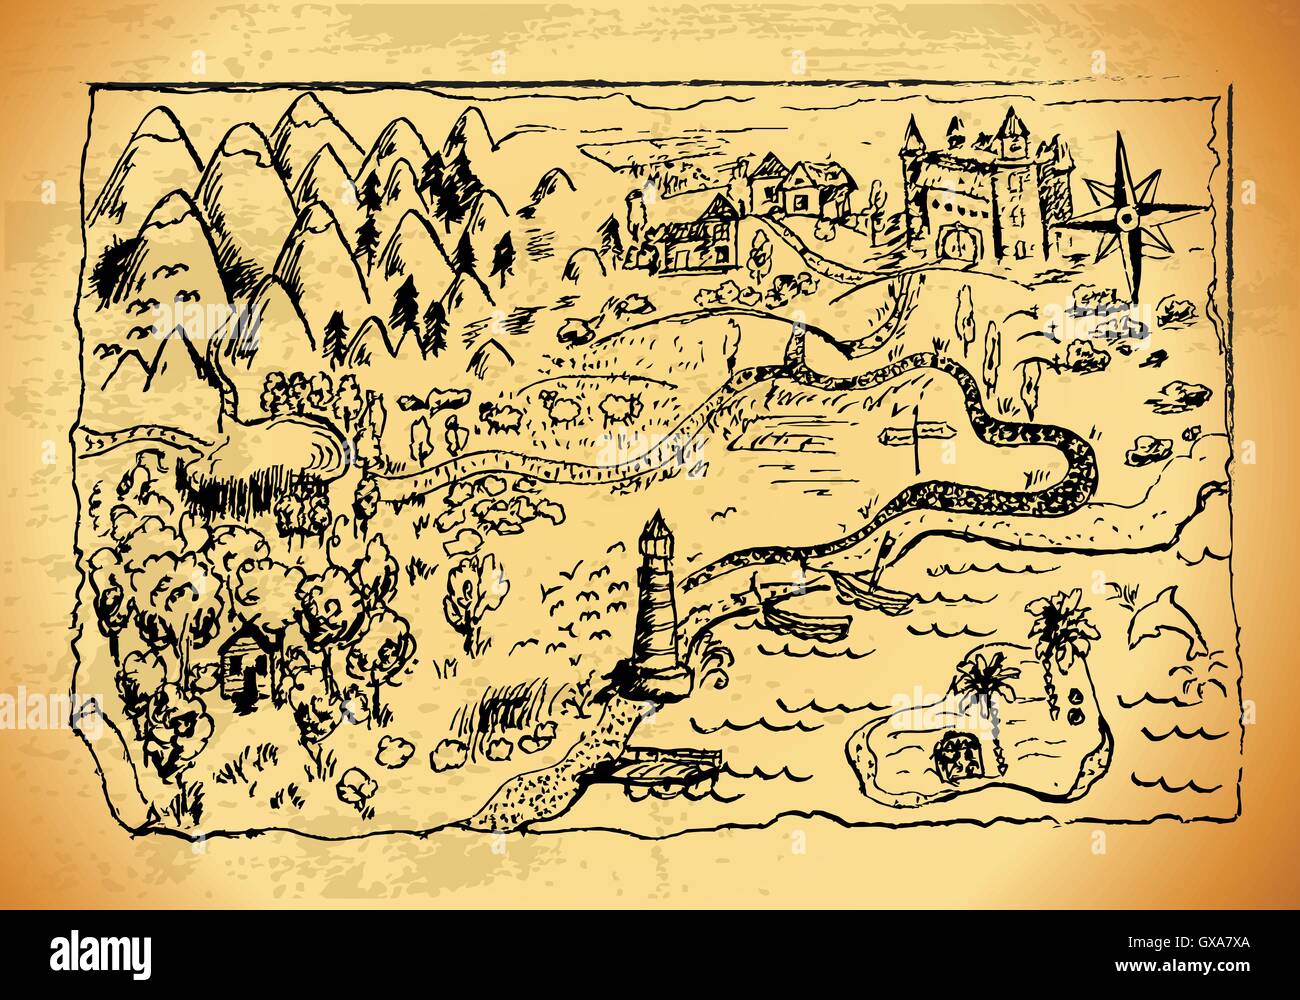 Old style hand drawn a map with landscapes, mountains, forest, sea